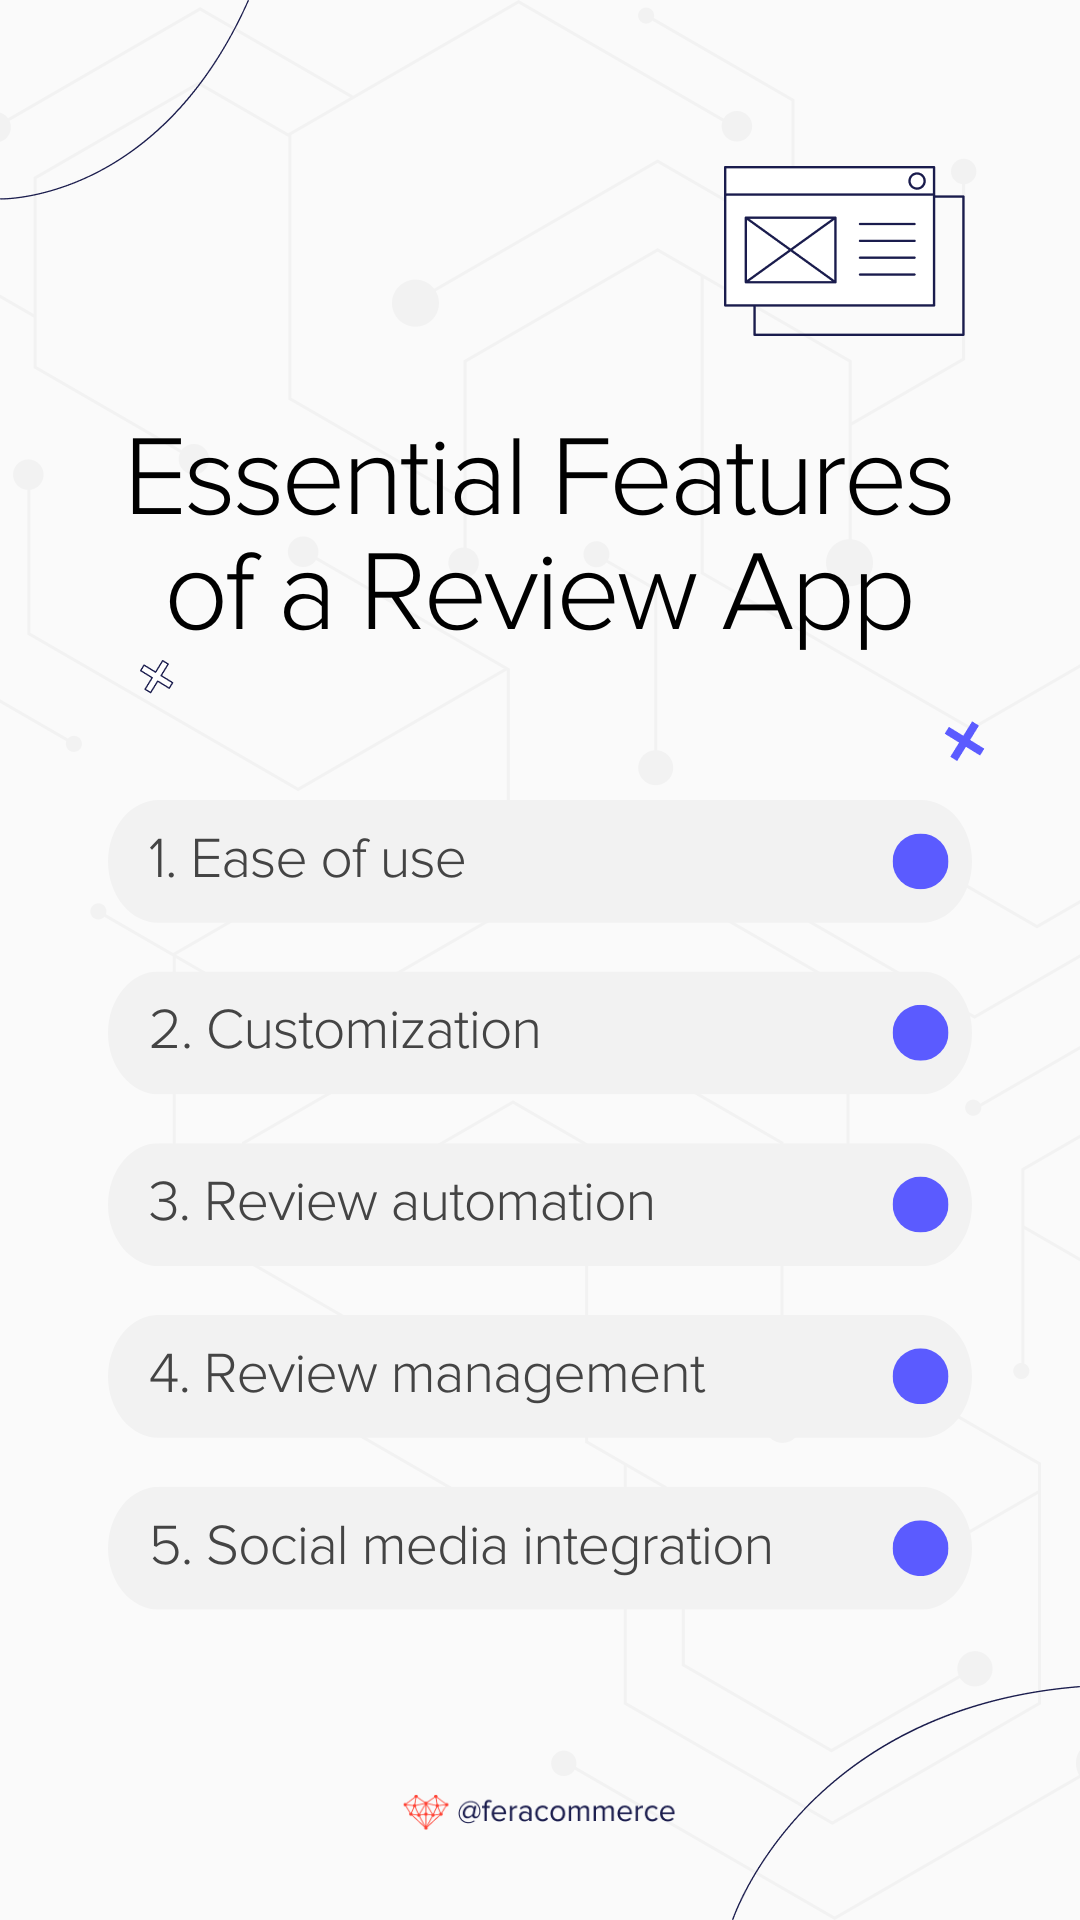 Essential Features of a Review App